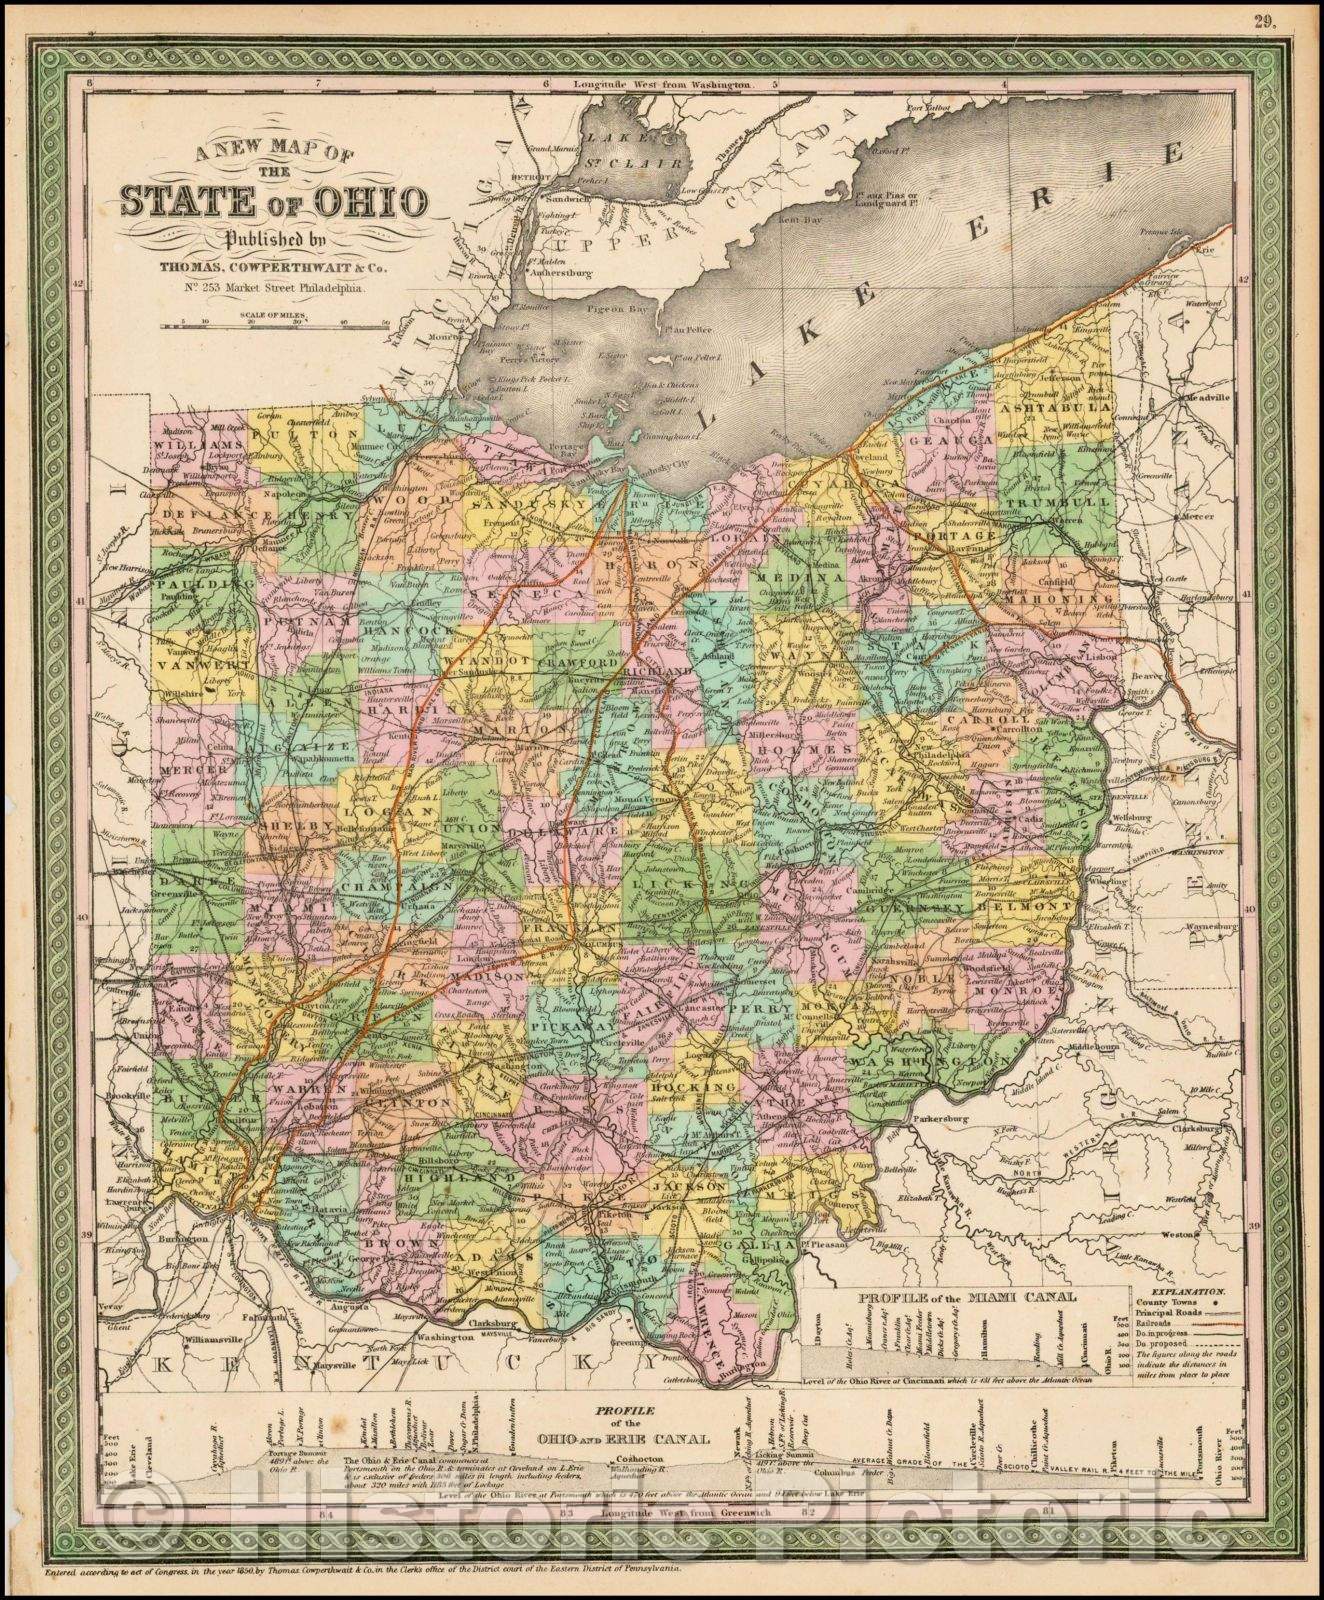 Historic Map - The State of Ohio, 1850, Thomas, Cowperthwait & Co. - Vintage Wall Art